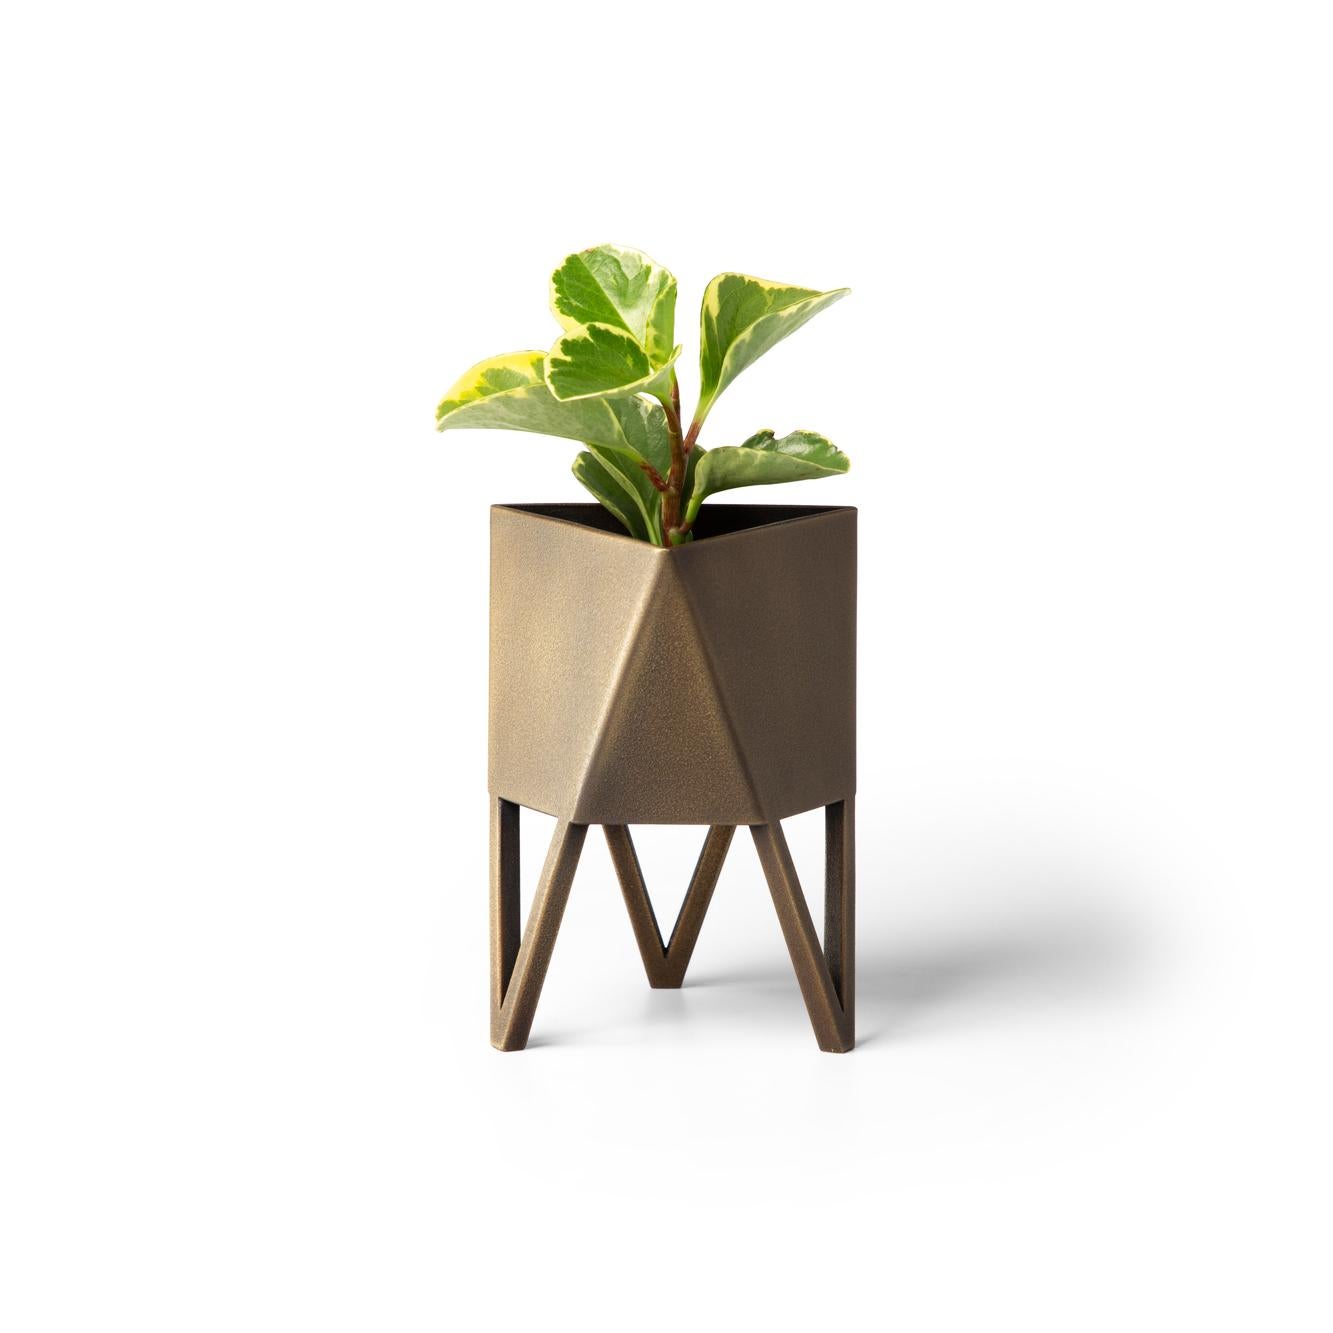 Deca Planter in Mars By Force/Collide, Size Small, 2023 For Sale 9